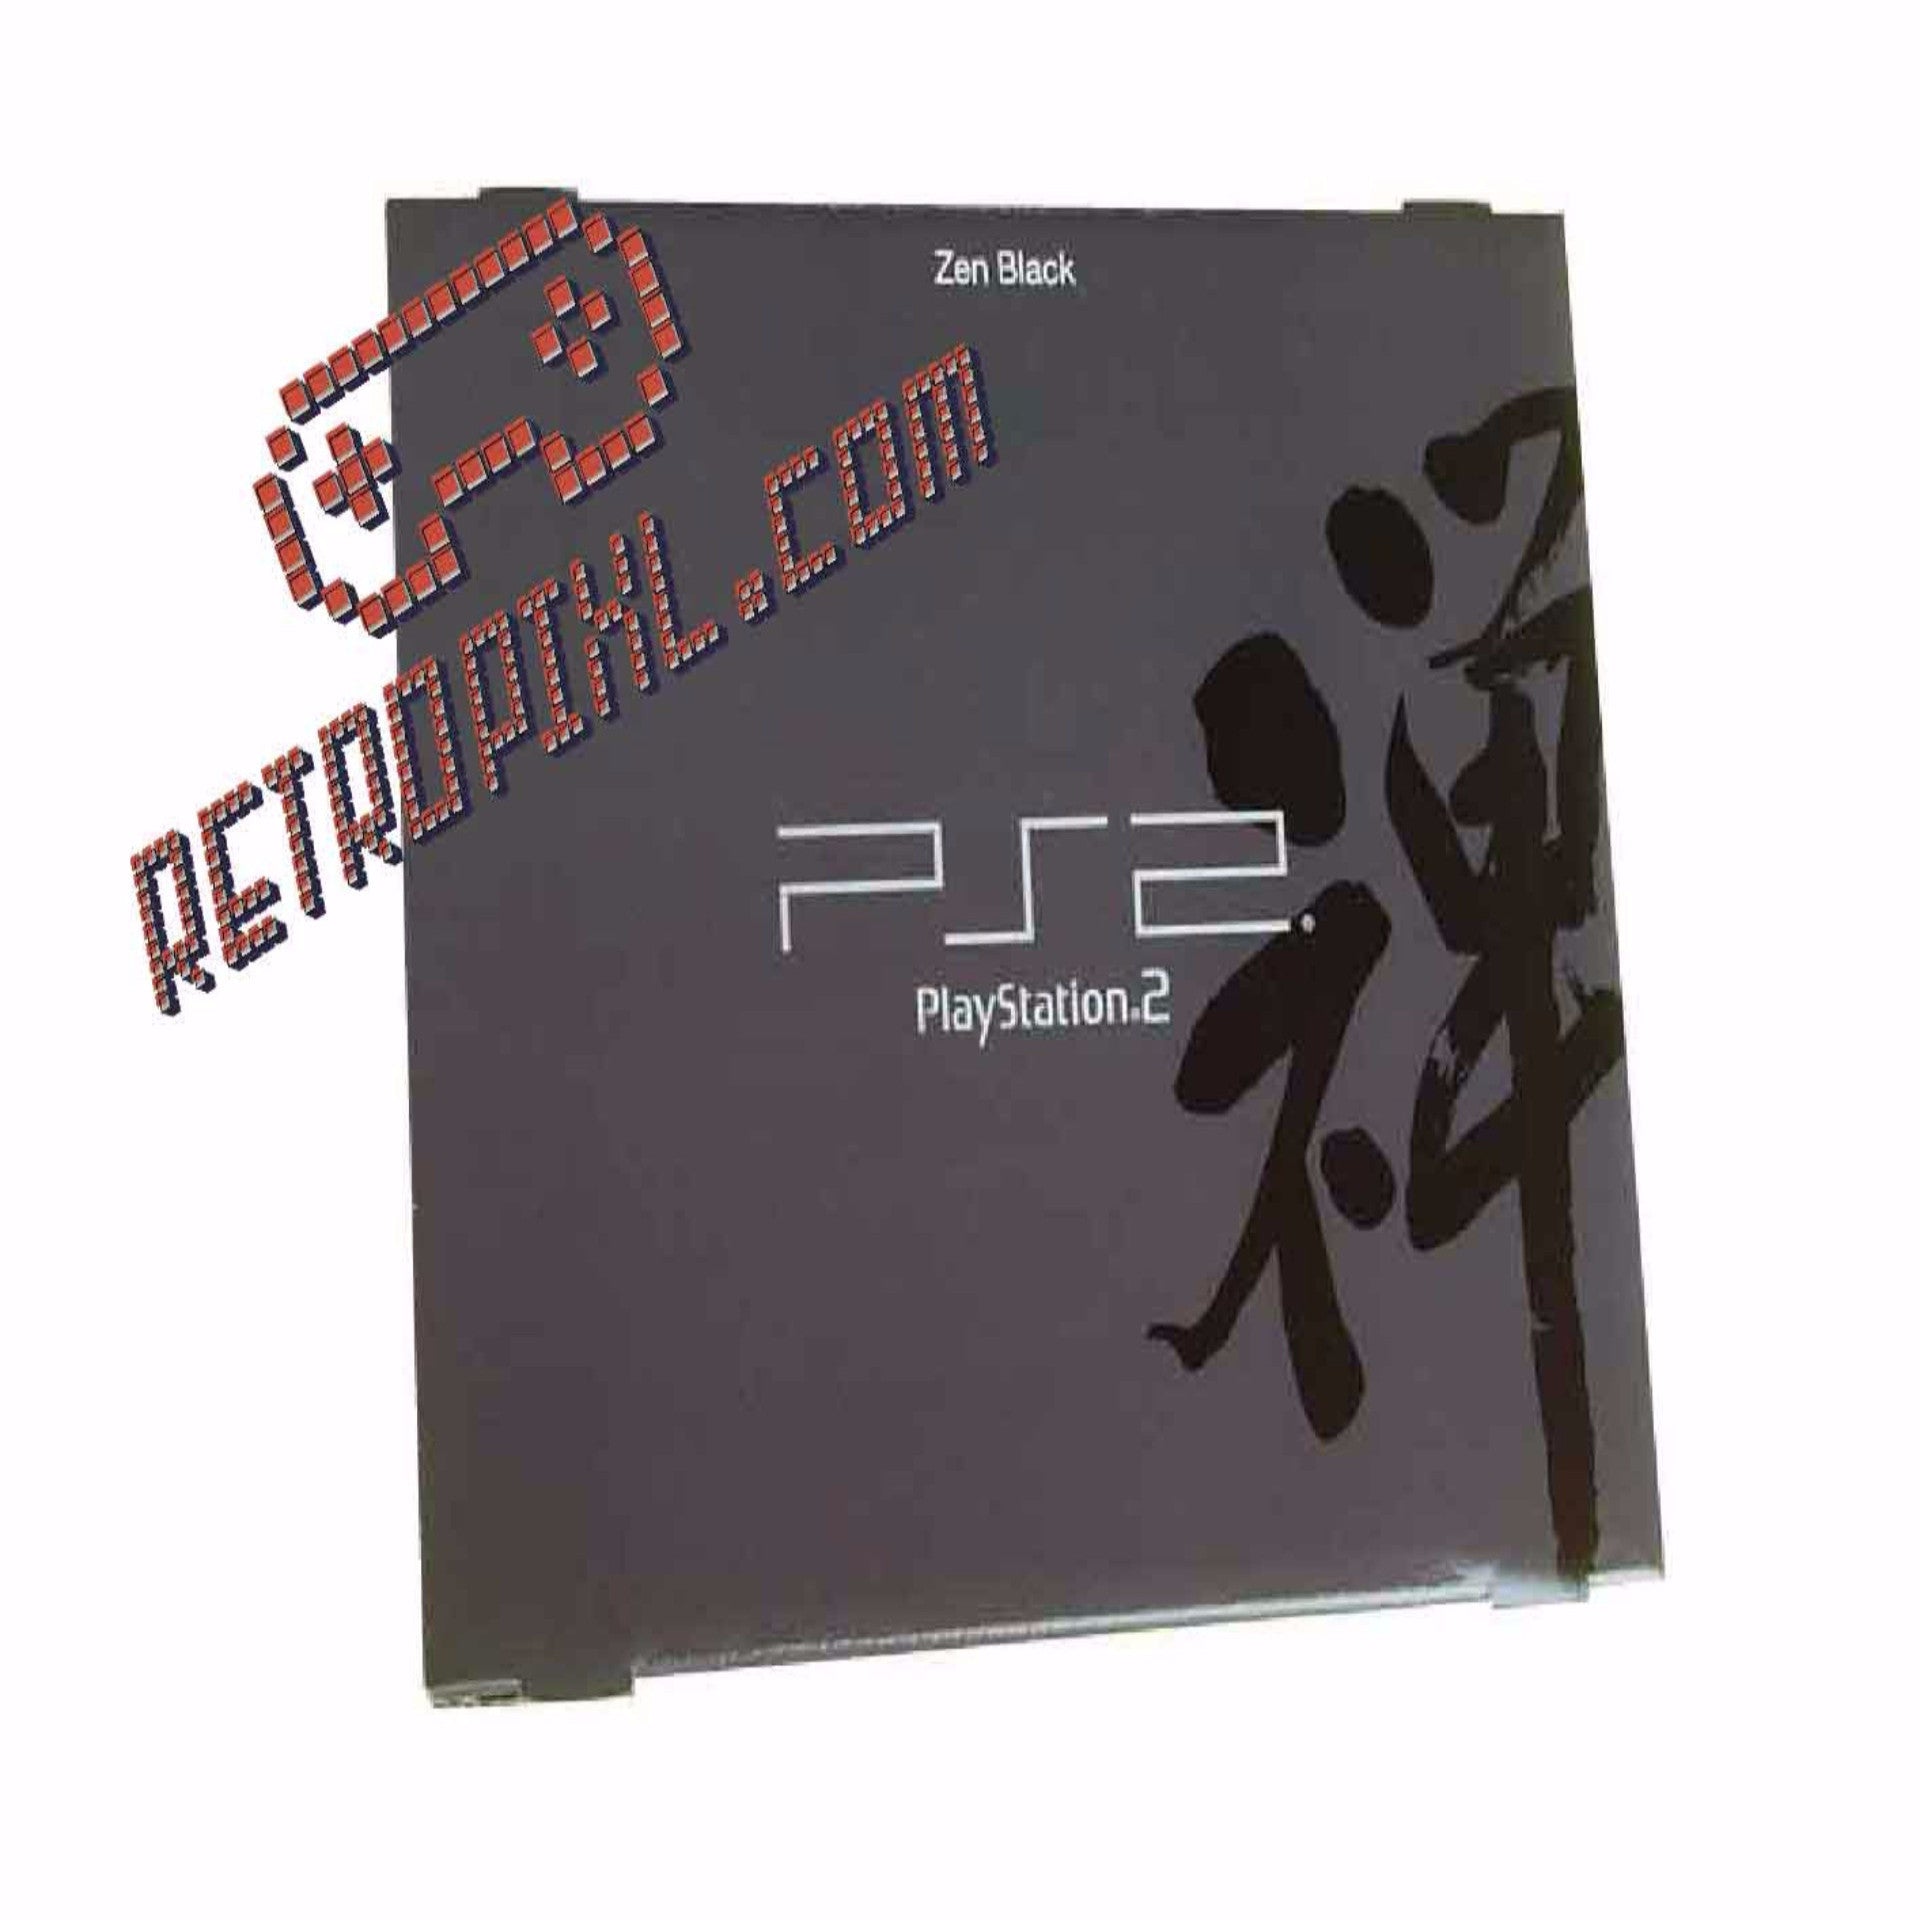 Sony Playstation 2 Zen Black LIMITED EDITION